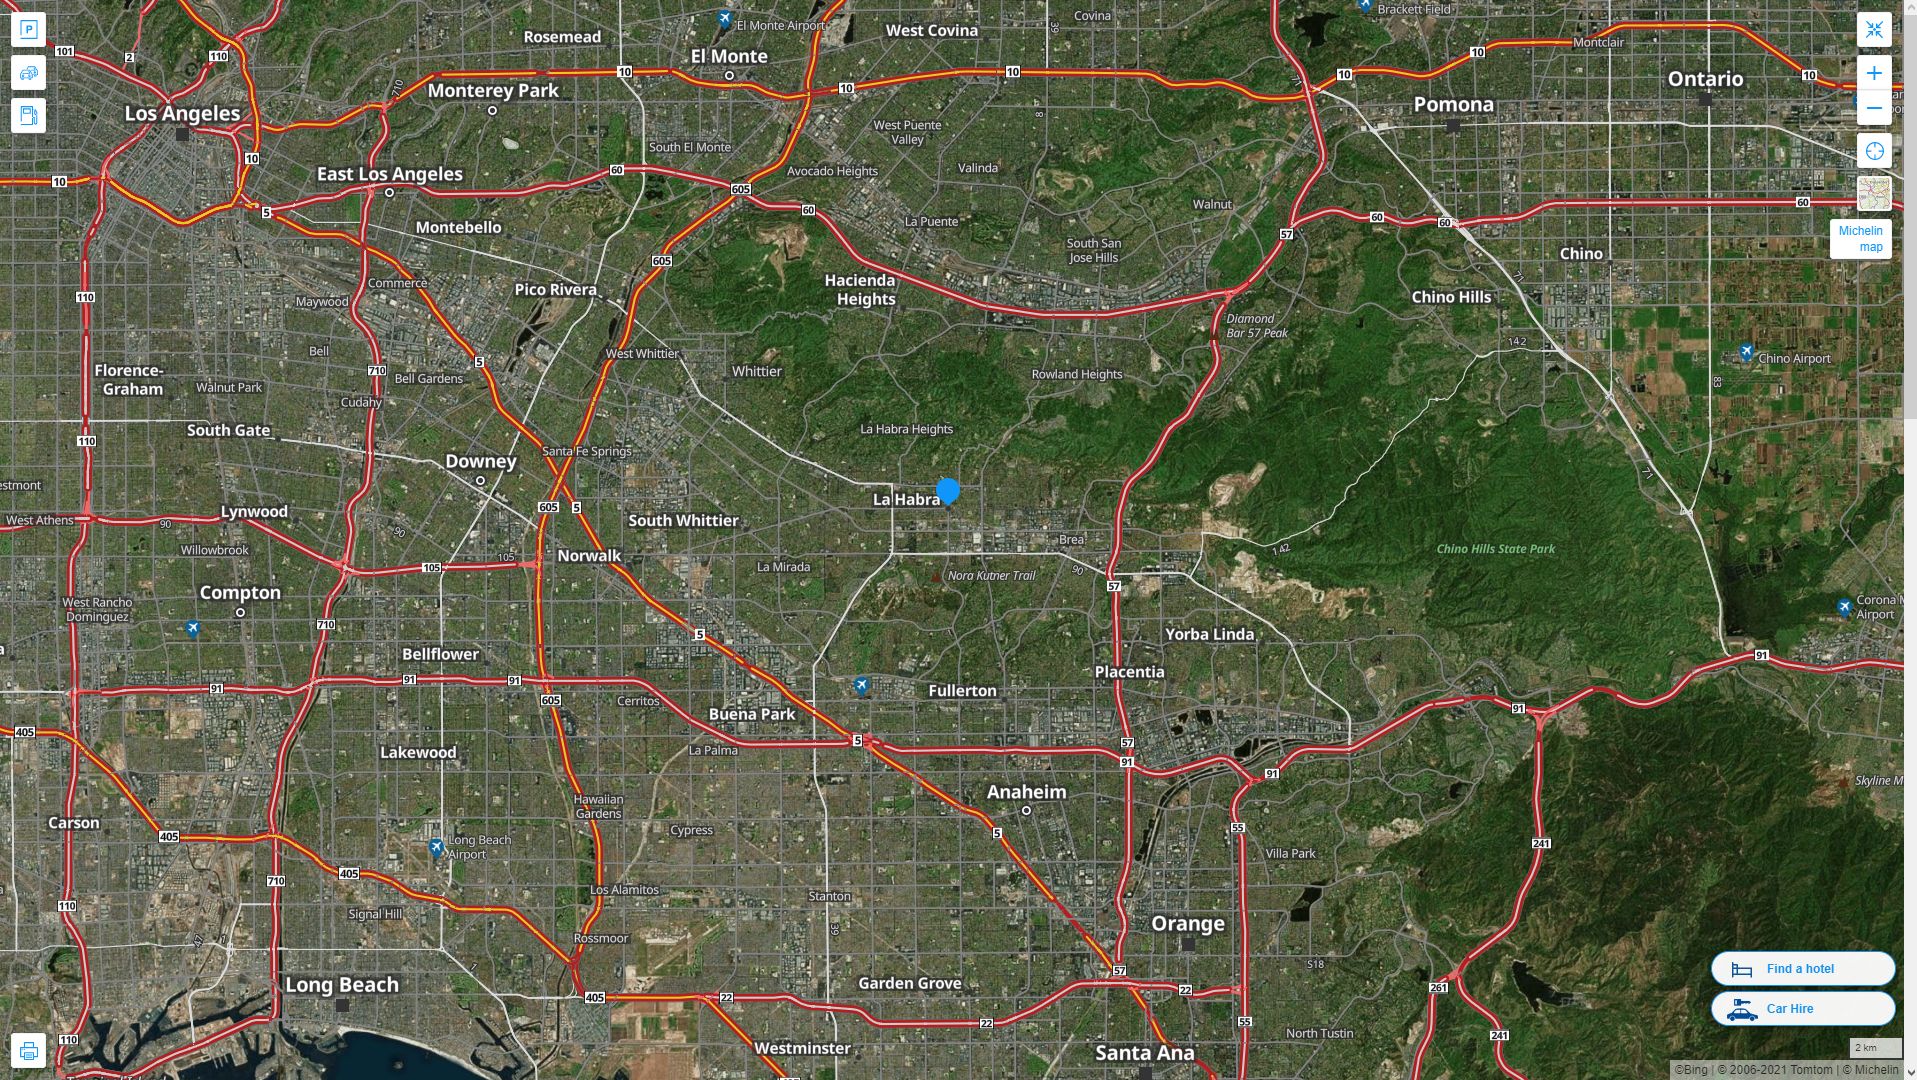 La Habra California Highway and Road Map with Satellite View